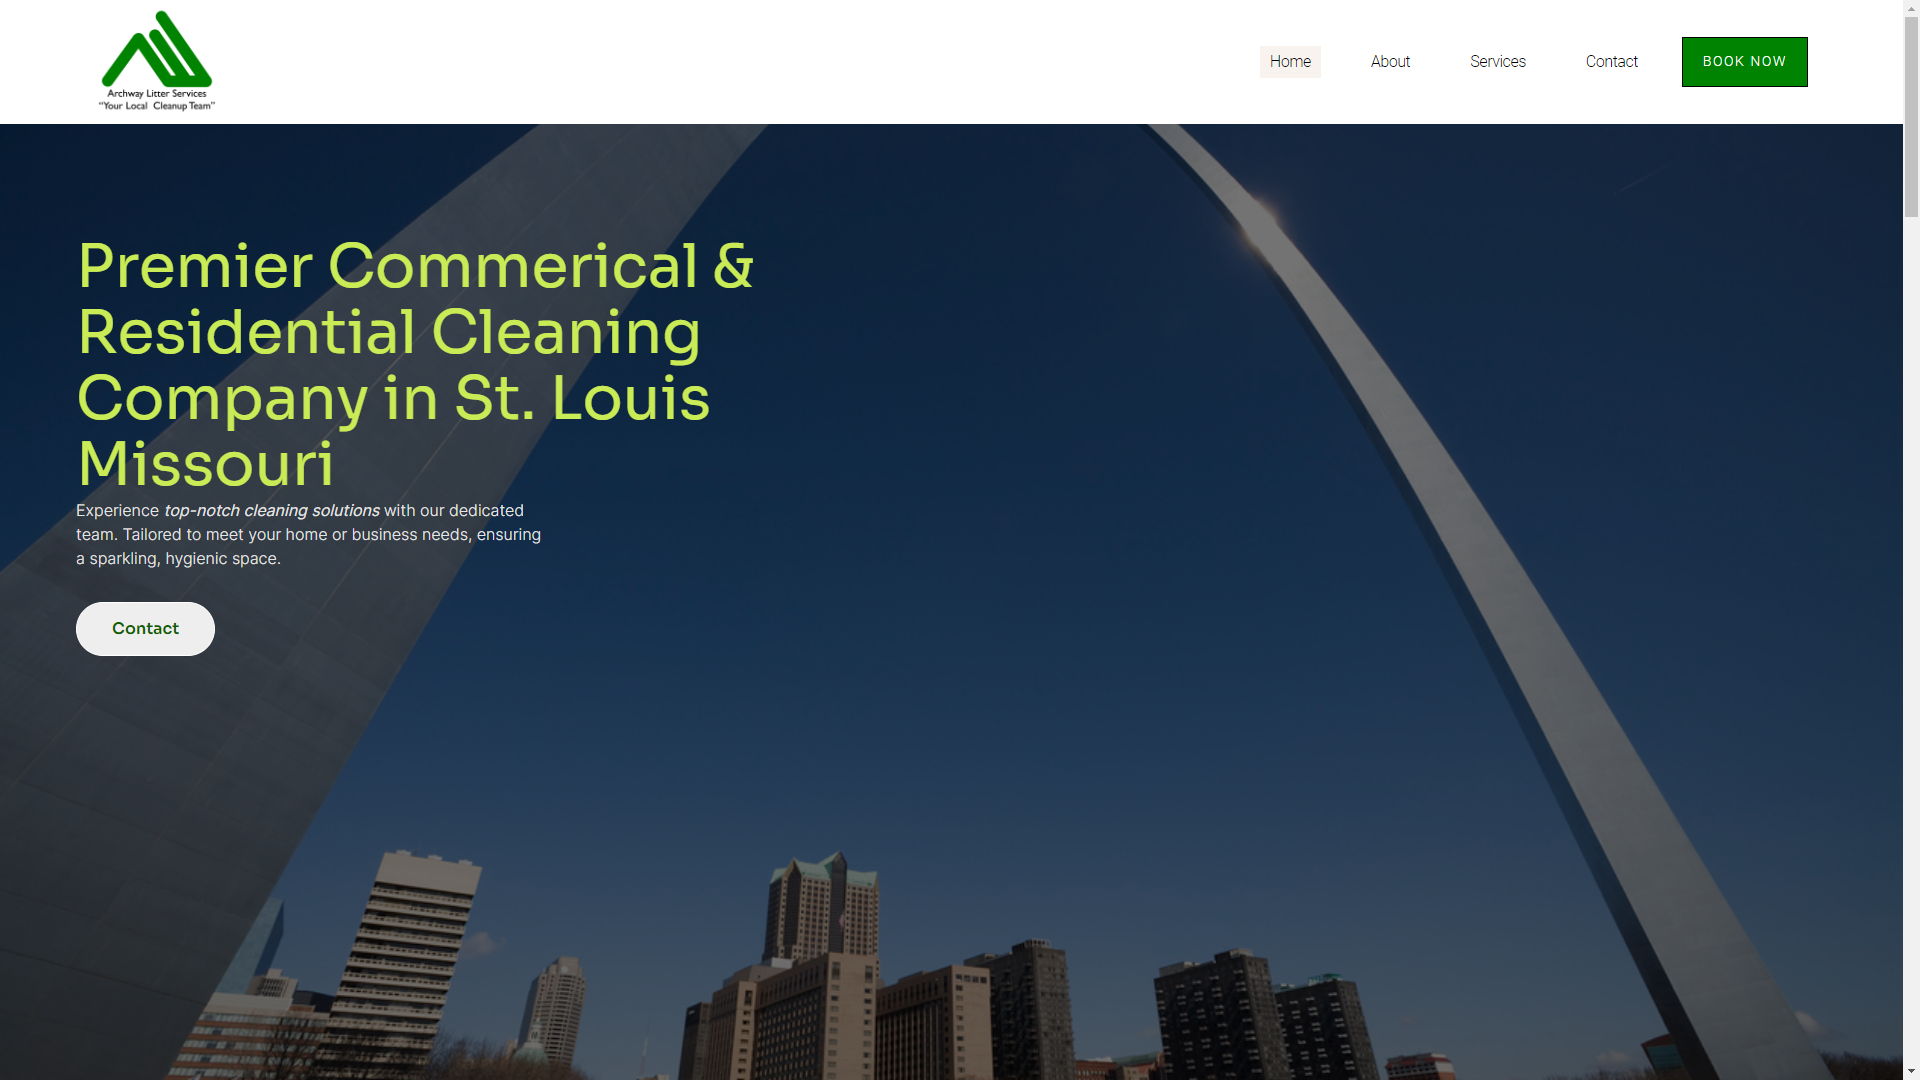 Archway Litter Cleanup Company Website